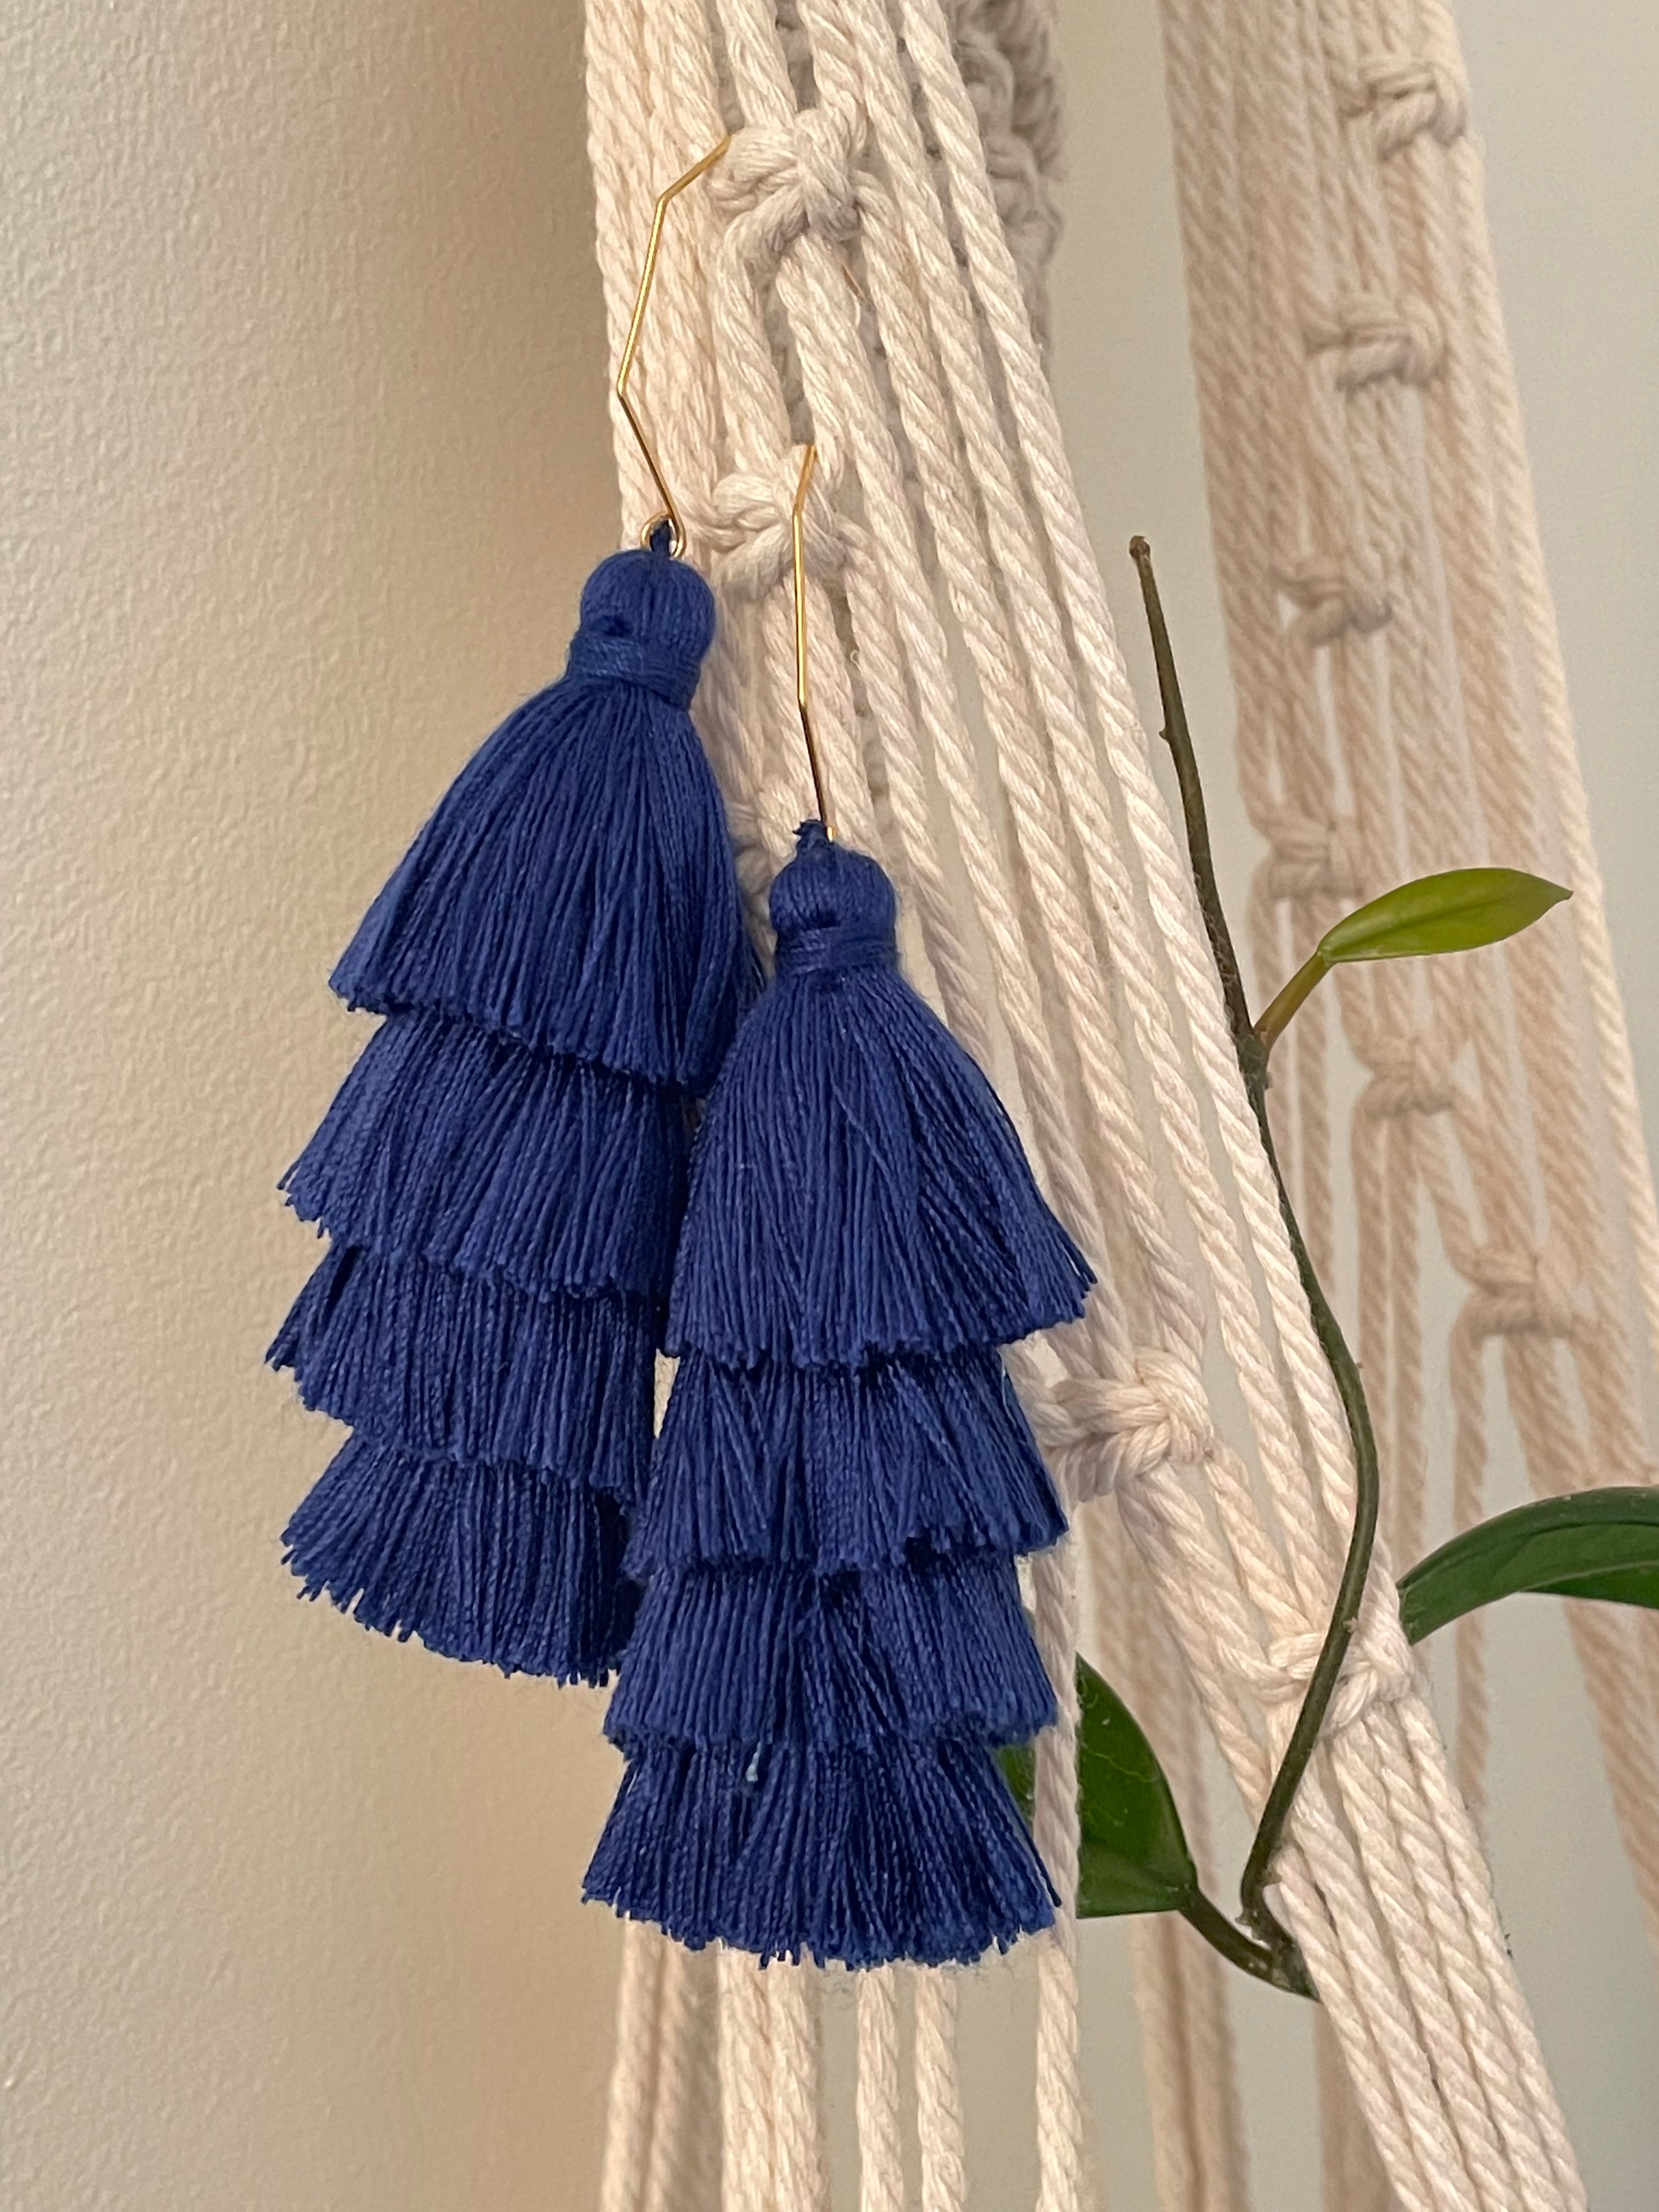 Stacked Tassels - Forget Me Not